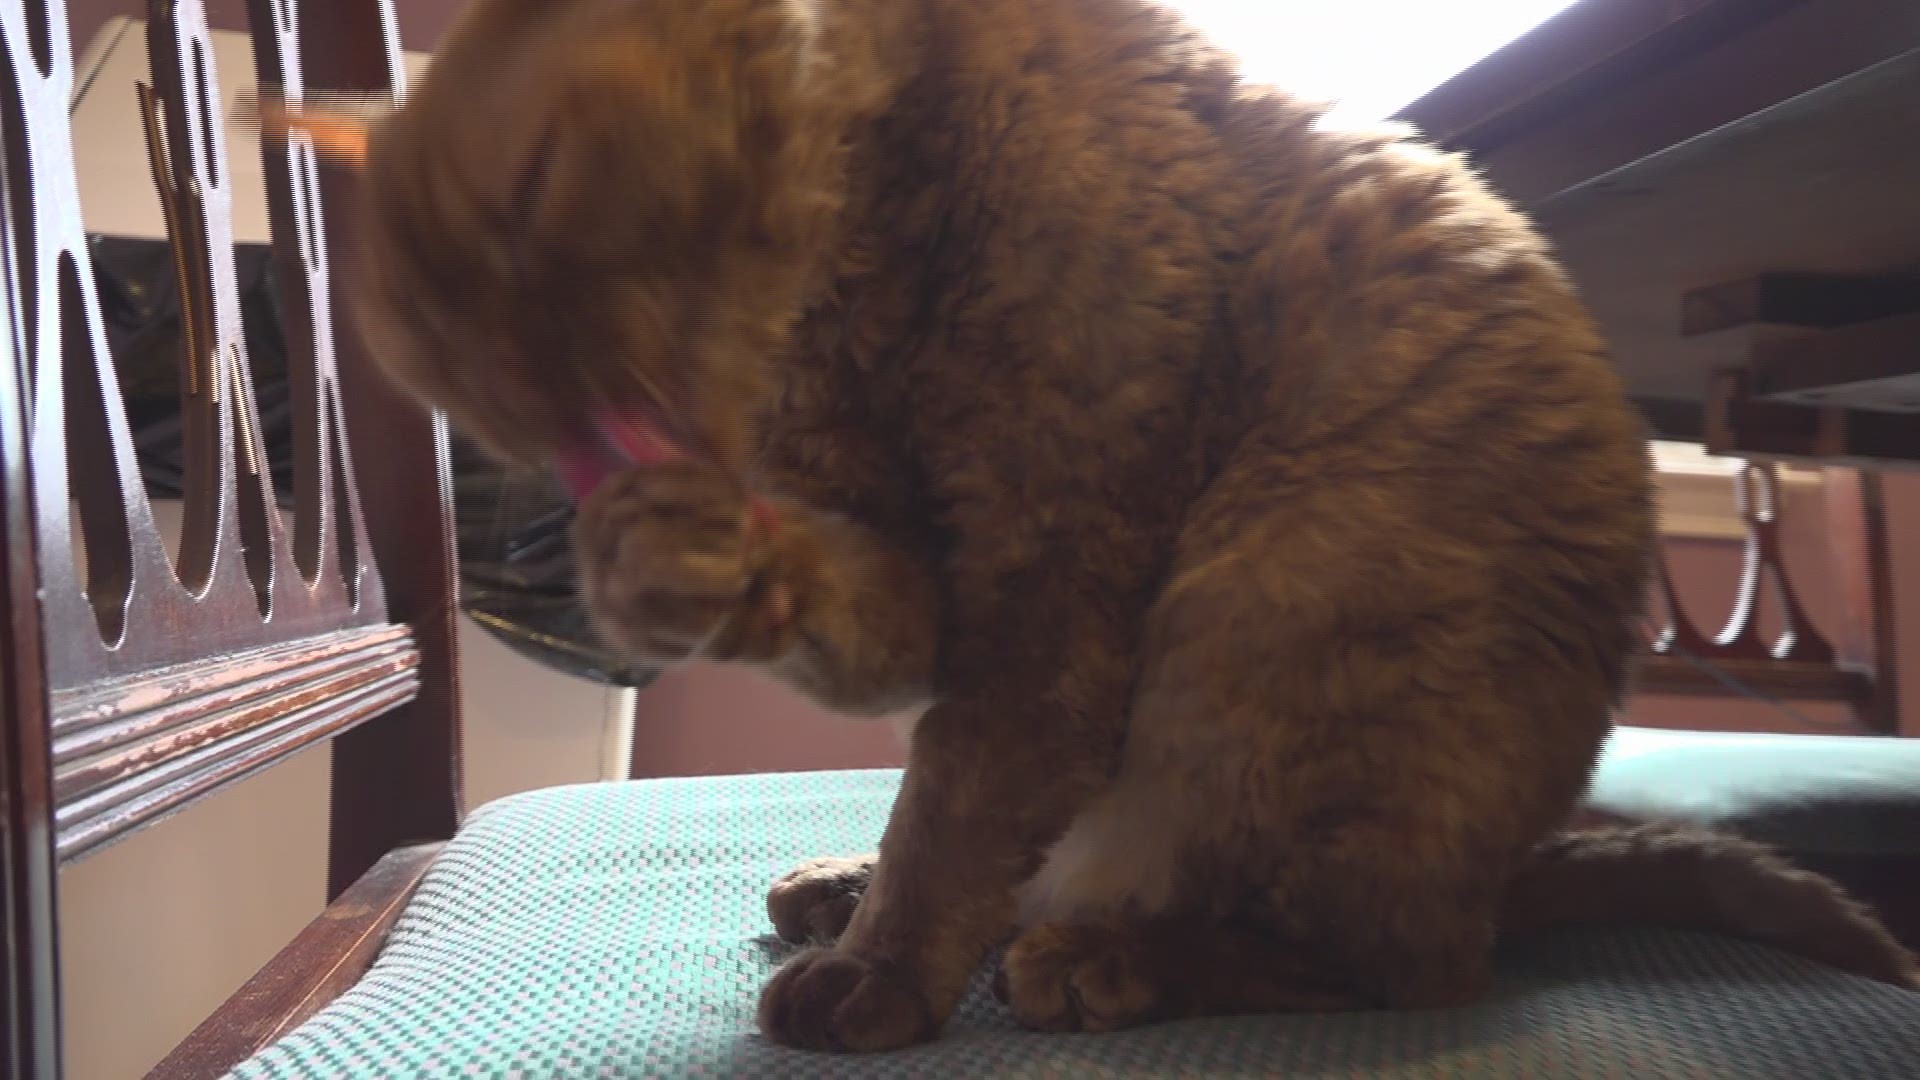 Video of a cat cafe in Lawrenceville.